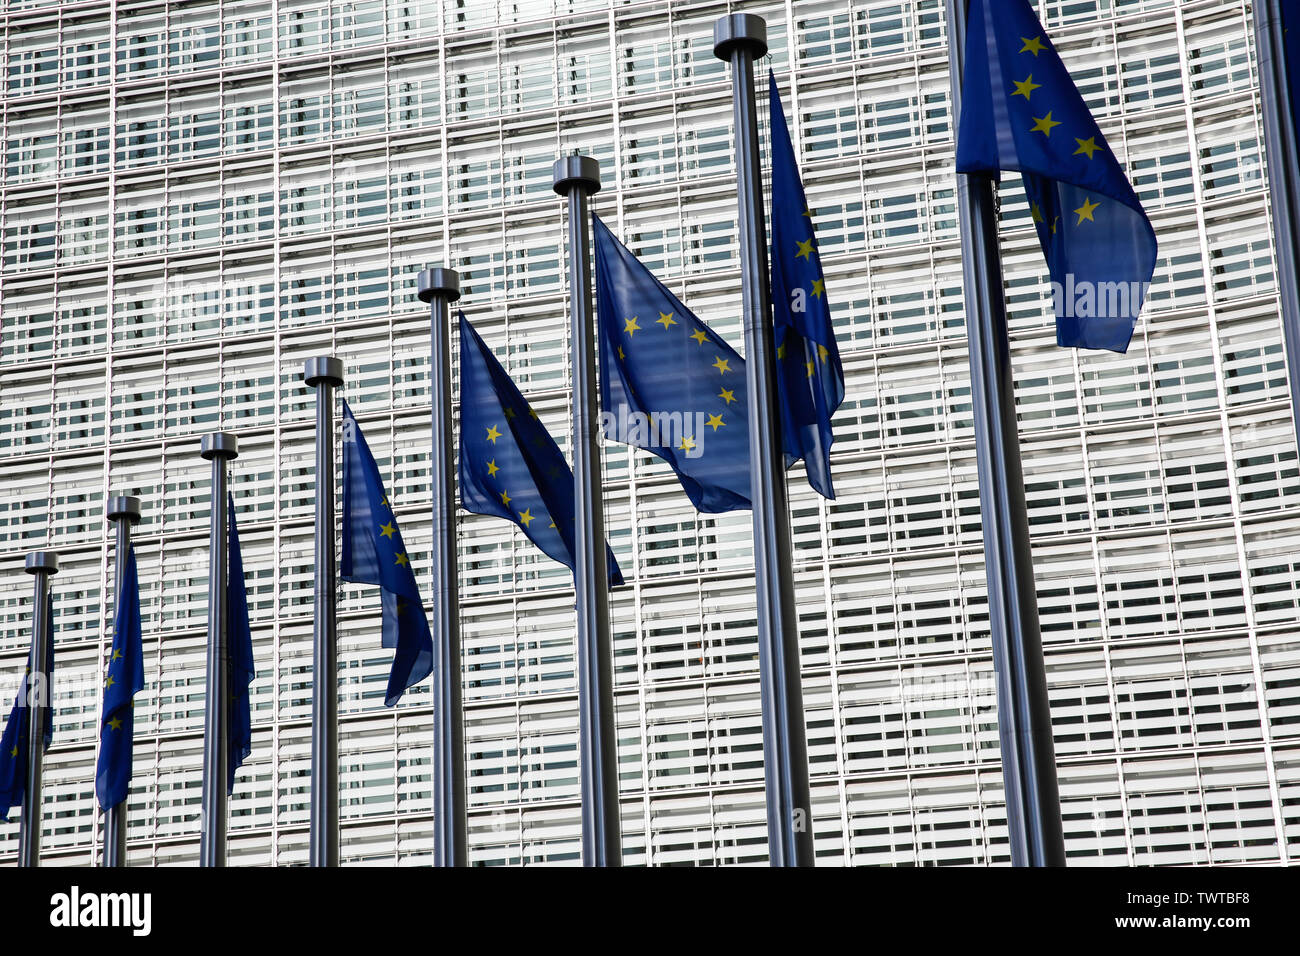 Brussels, Belgium – June 21, 2019: EU flags swing in the air in front of European Commission building Stock Photo